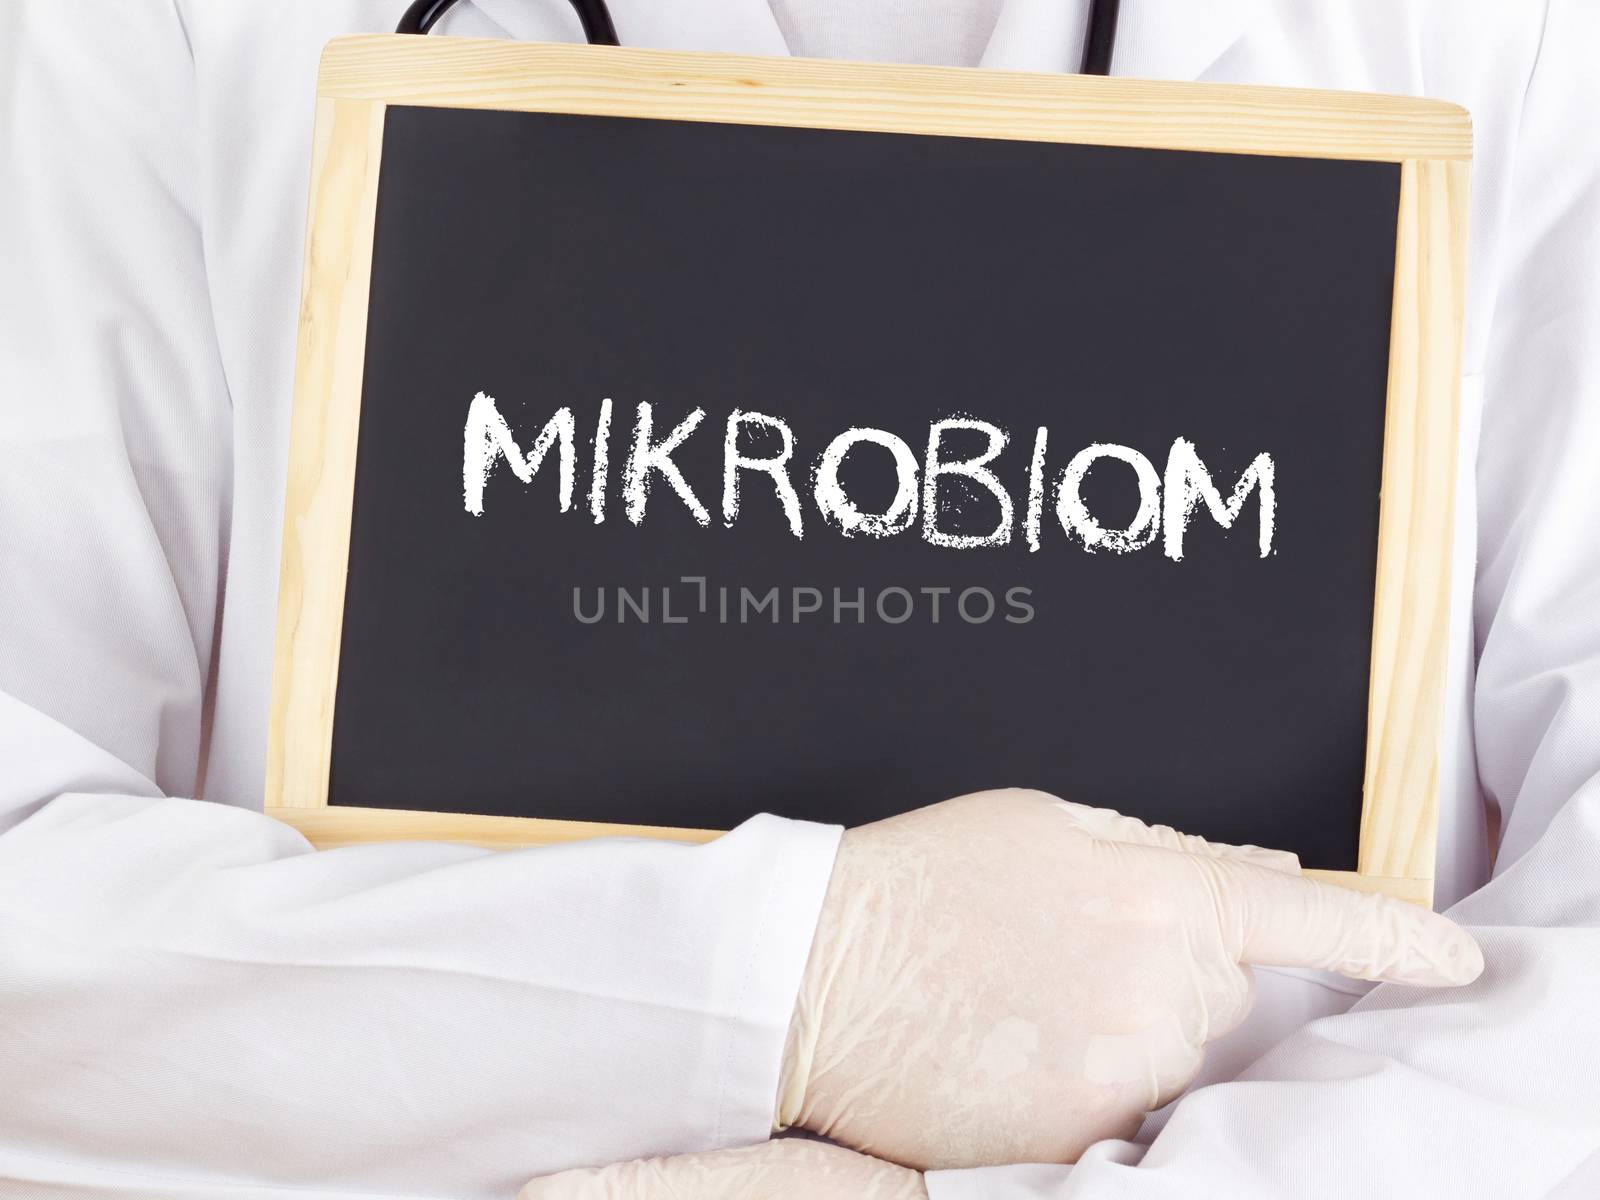 Doctor shows information: microbiome in german language